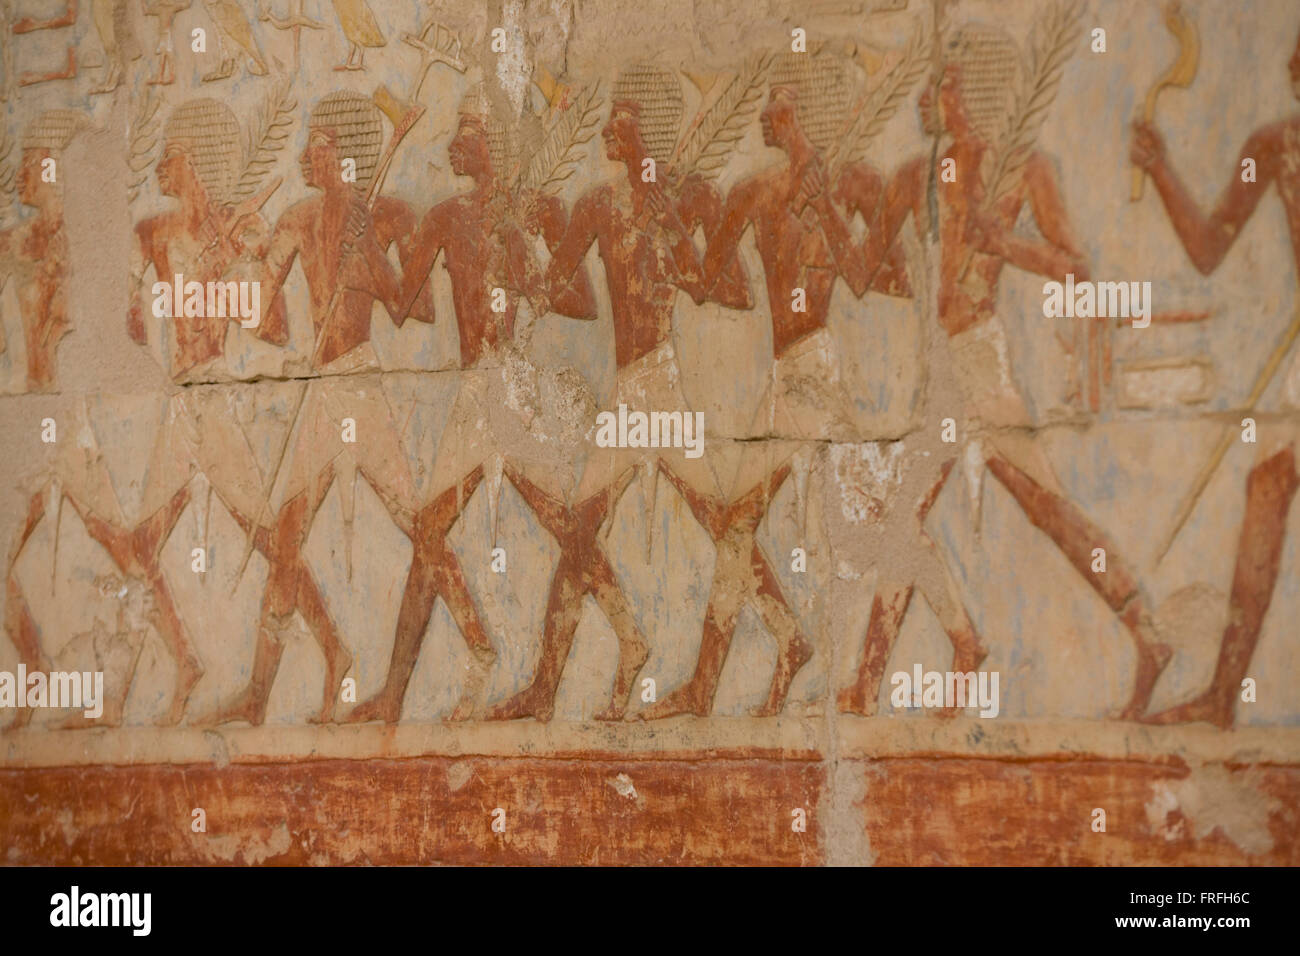 A detail of ancient Egyptian hieroglyphs showing Somalian slaves at the ancient Egyptian Temple of Hatshepsut near the Valley of the Kings, Luxor, Nile Valley, Egypt. The Mortuary Temple of Queen Hatshepsut, the Djeser-Djeseru, is located beneath cliffs at Deir el Bahari ('the Northern Monastery'). The mortuary temple is dedicated to the sun god Amon-Ra and is considered one of the 'incomparable monuments of ancient Egypt.' The temple was the site of the massacre of 62 people, mostly tourists, by Islamists on 17 November 1997. Stock Photo